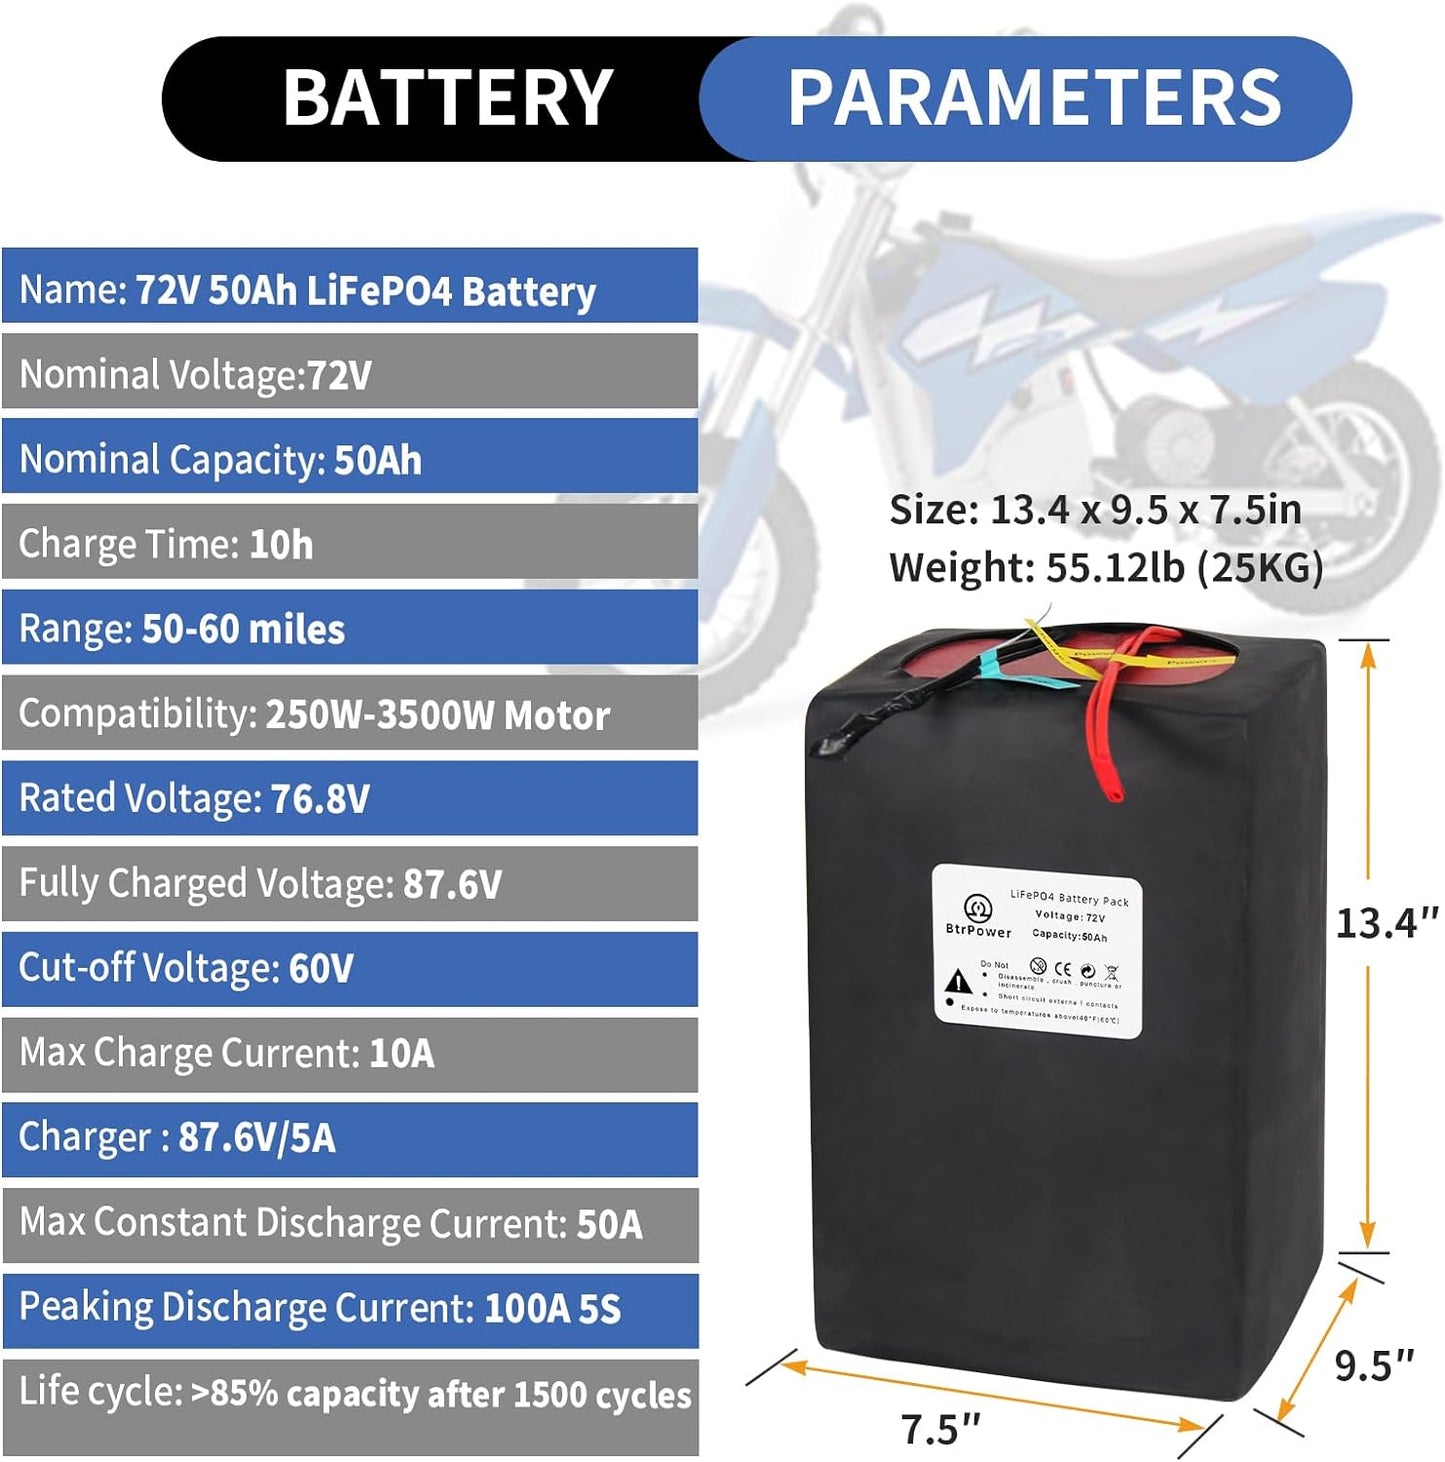 BtrPower Ebike Battery 72V 50AH Lithium LiFePO4 Battery Pack with 50A BMS,5A Charger